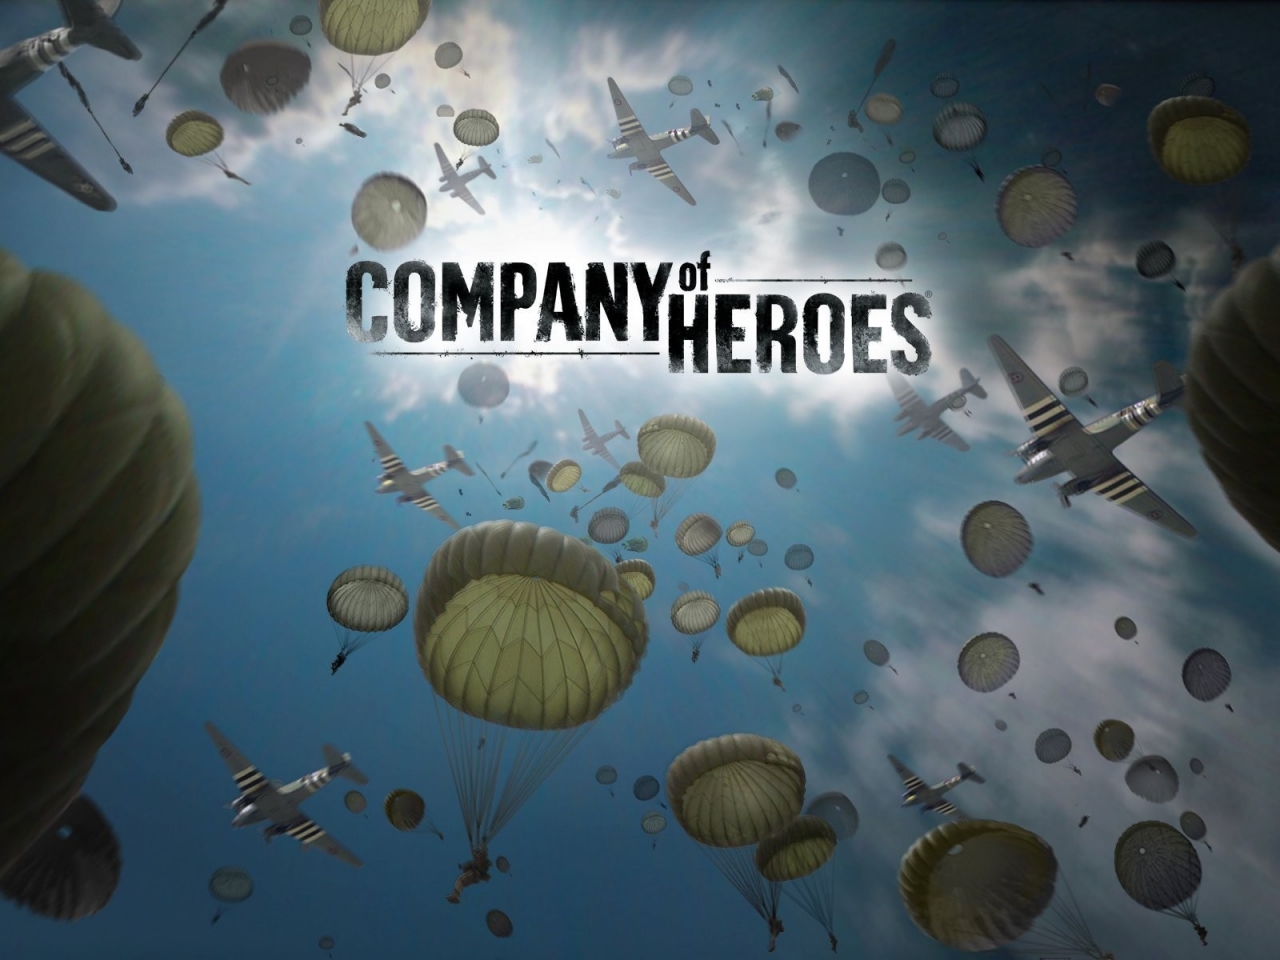 Company of Heroes for 1280 x 960 resolution